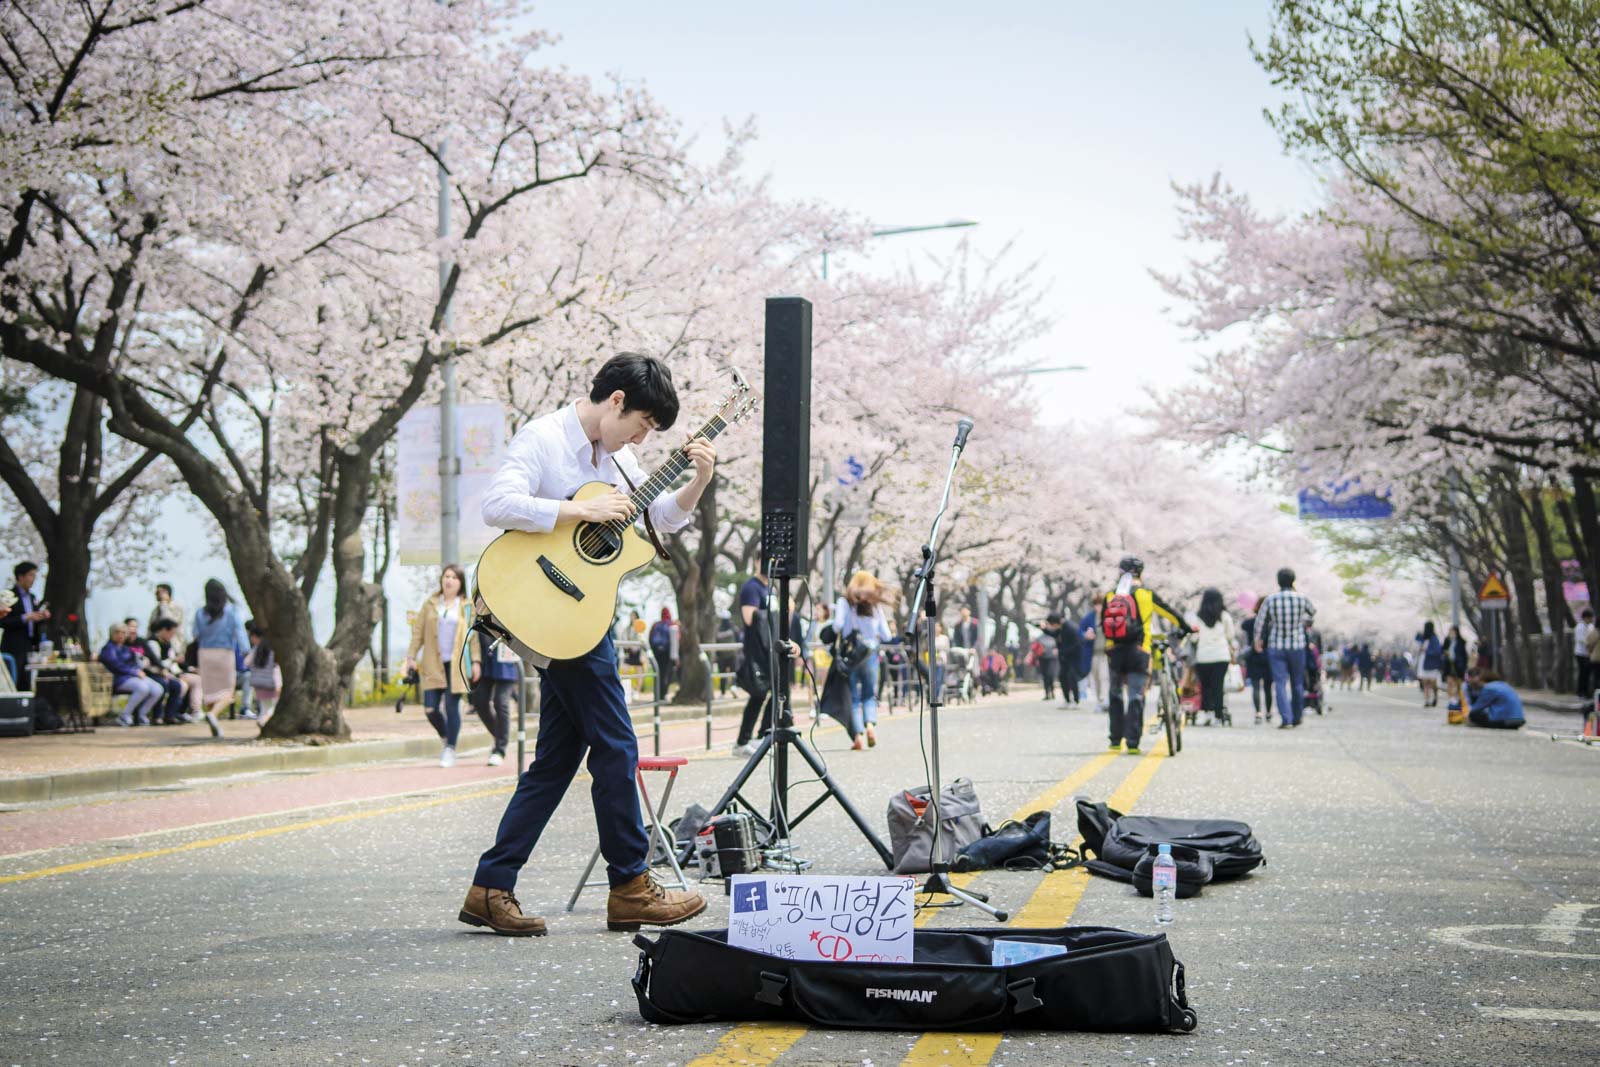 Seoul, on the ground, insider tips, cheery blossom